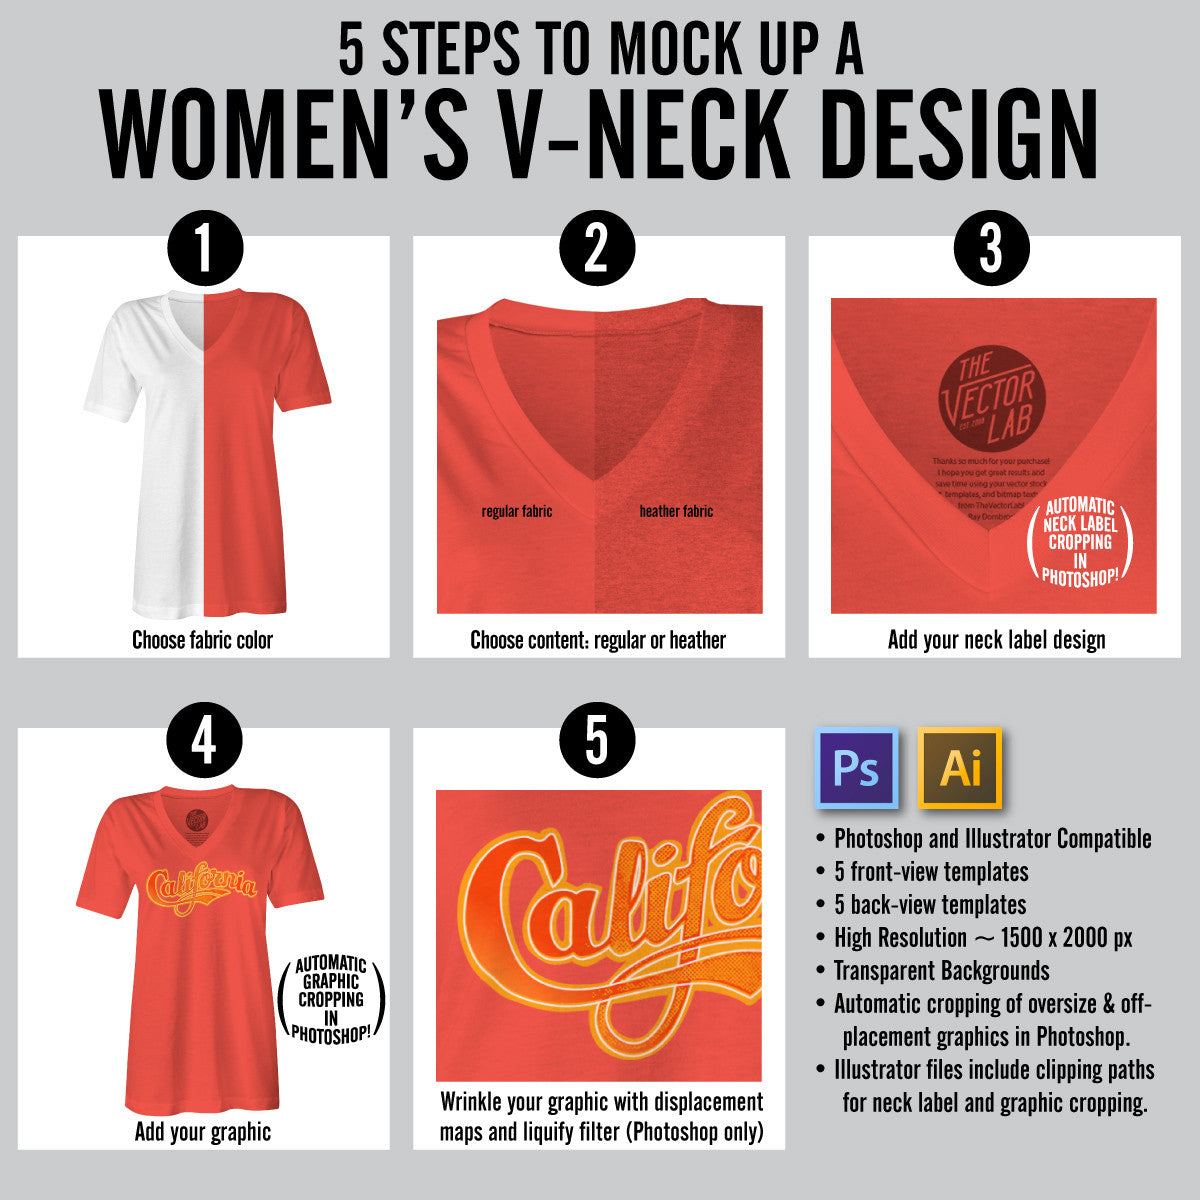 Download Women's V-Neck Mockup Templates - TheVectorLab